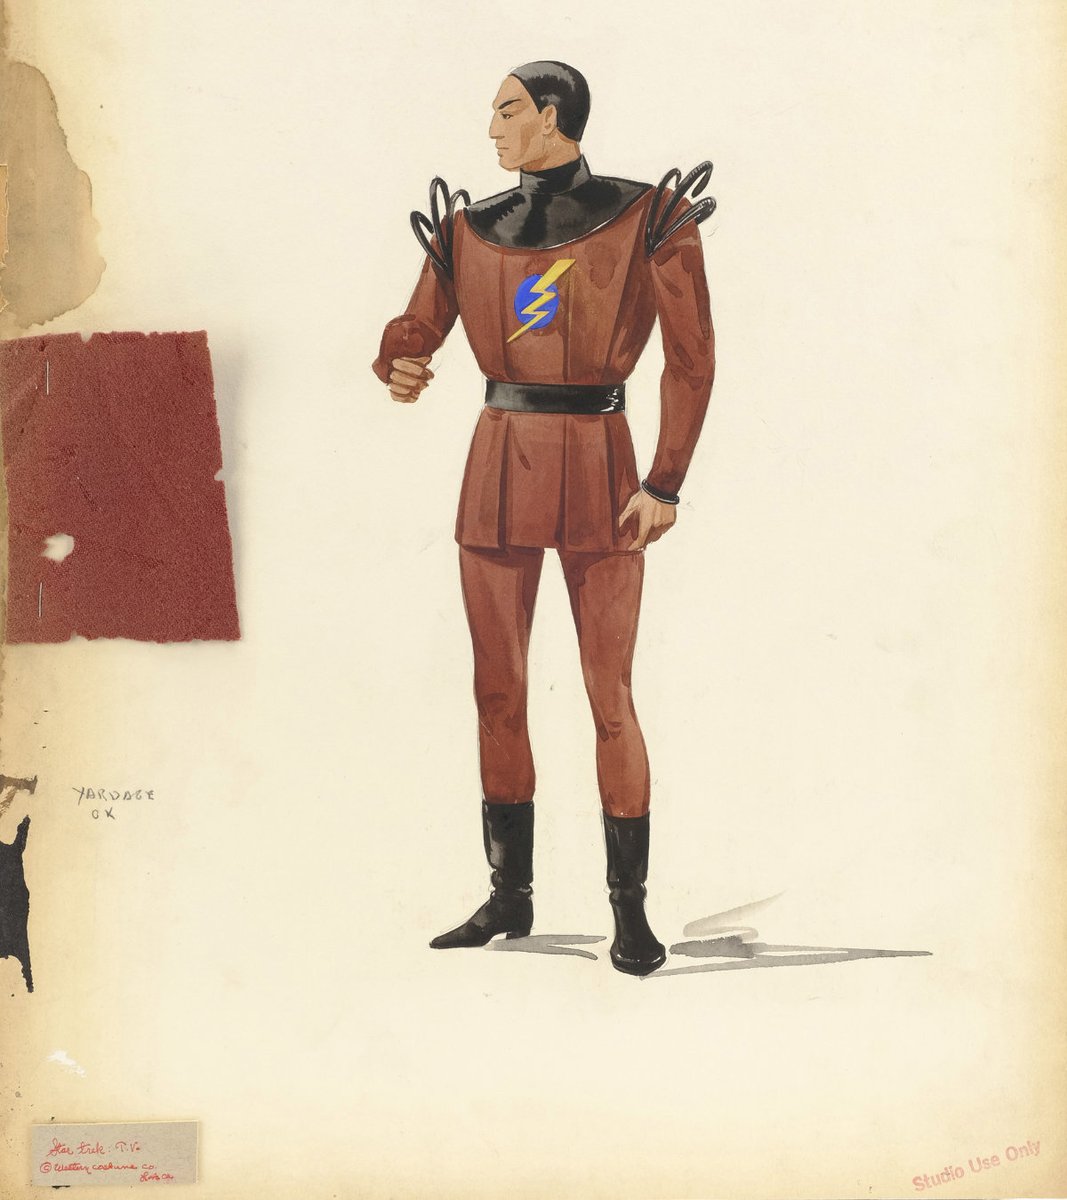 This is a fascinating piece of #StarTrek history: An early costume design for Spock, pre-dating William Ware Theiss' involvement in the show.